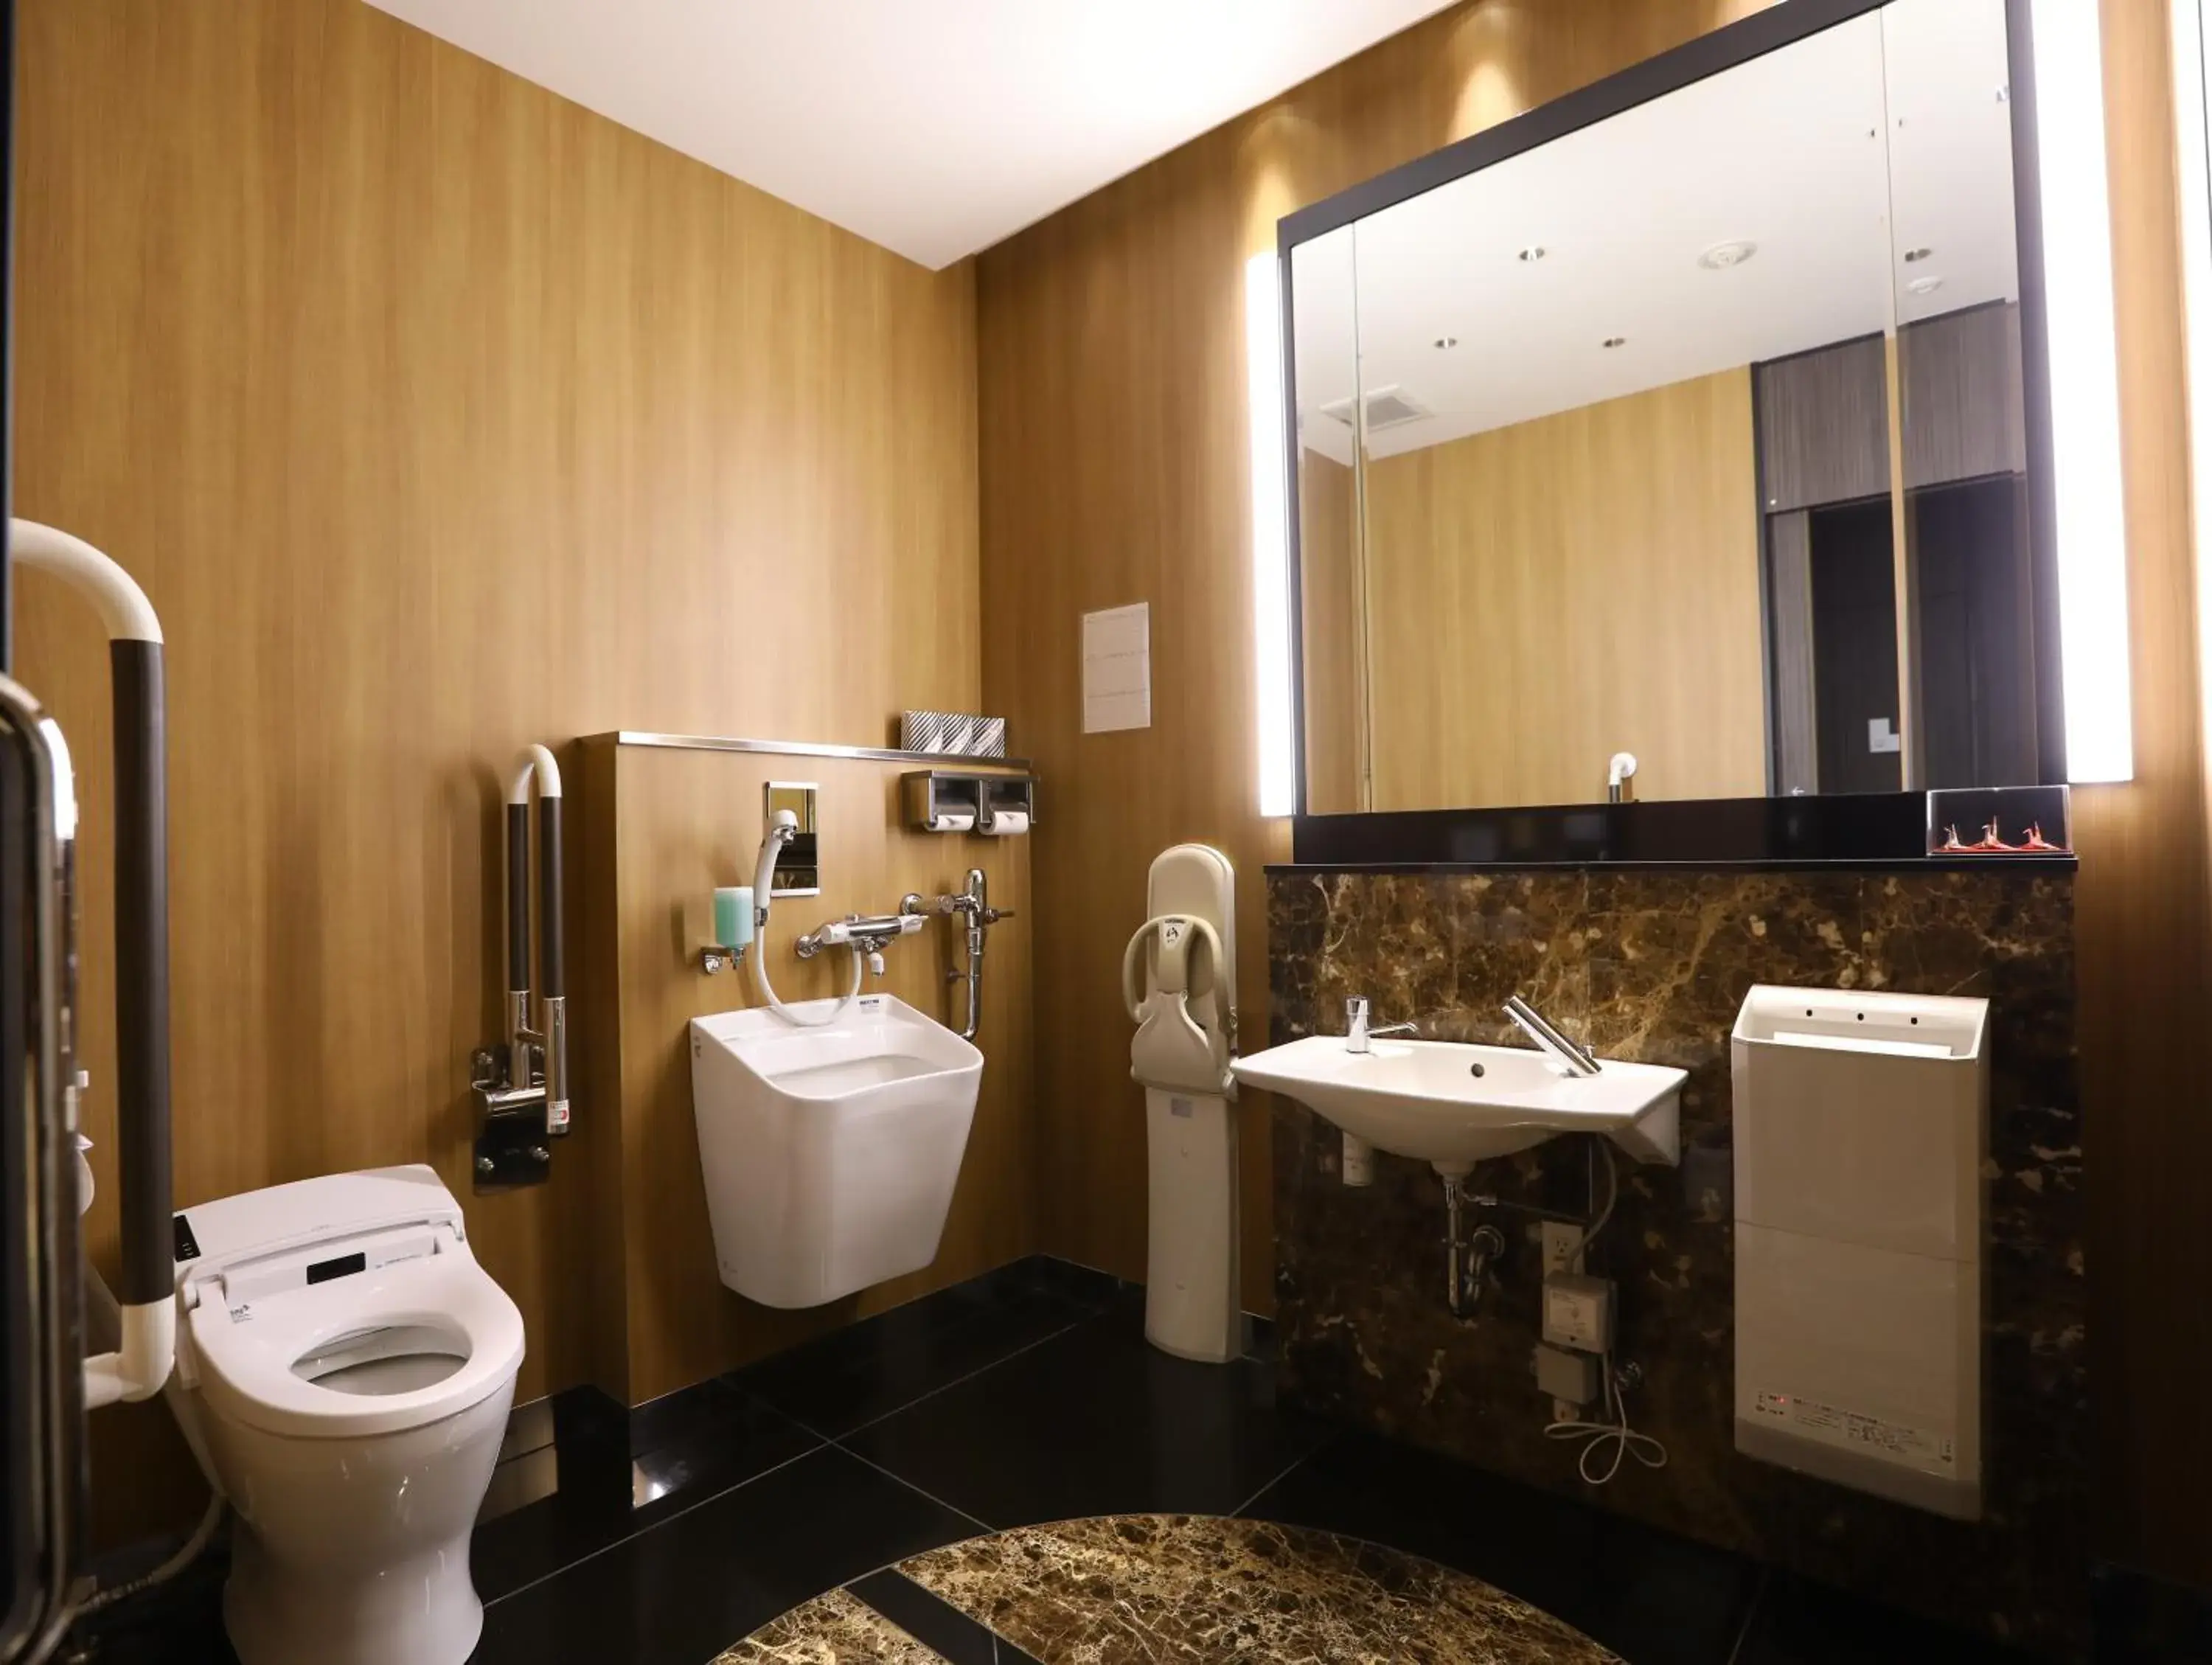 Facility for disabled guests, Bathroom in APA Hotel Ueno Ekikita